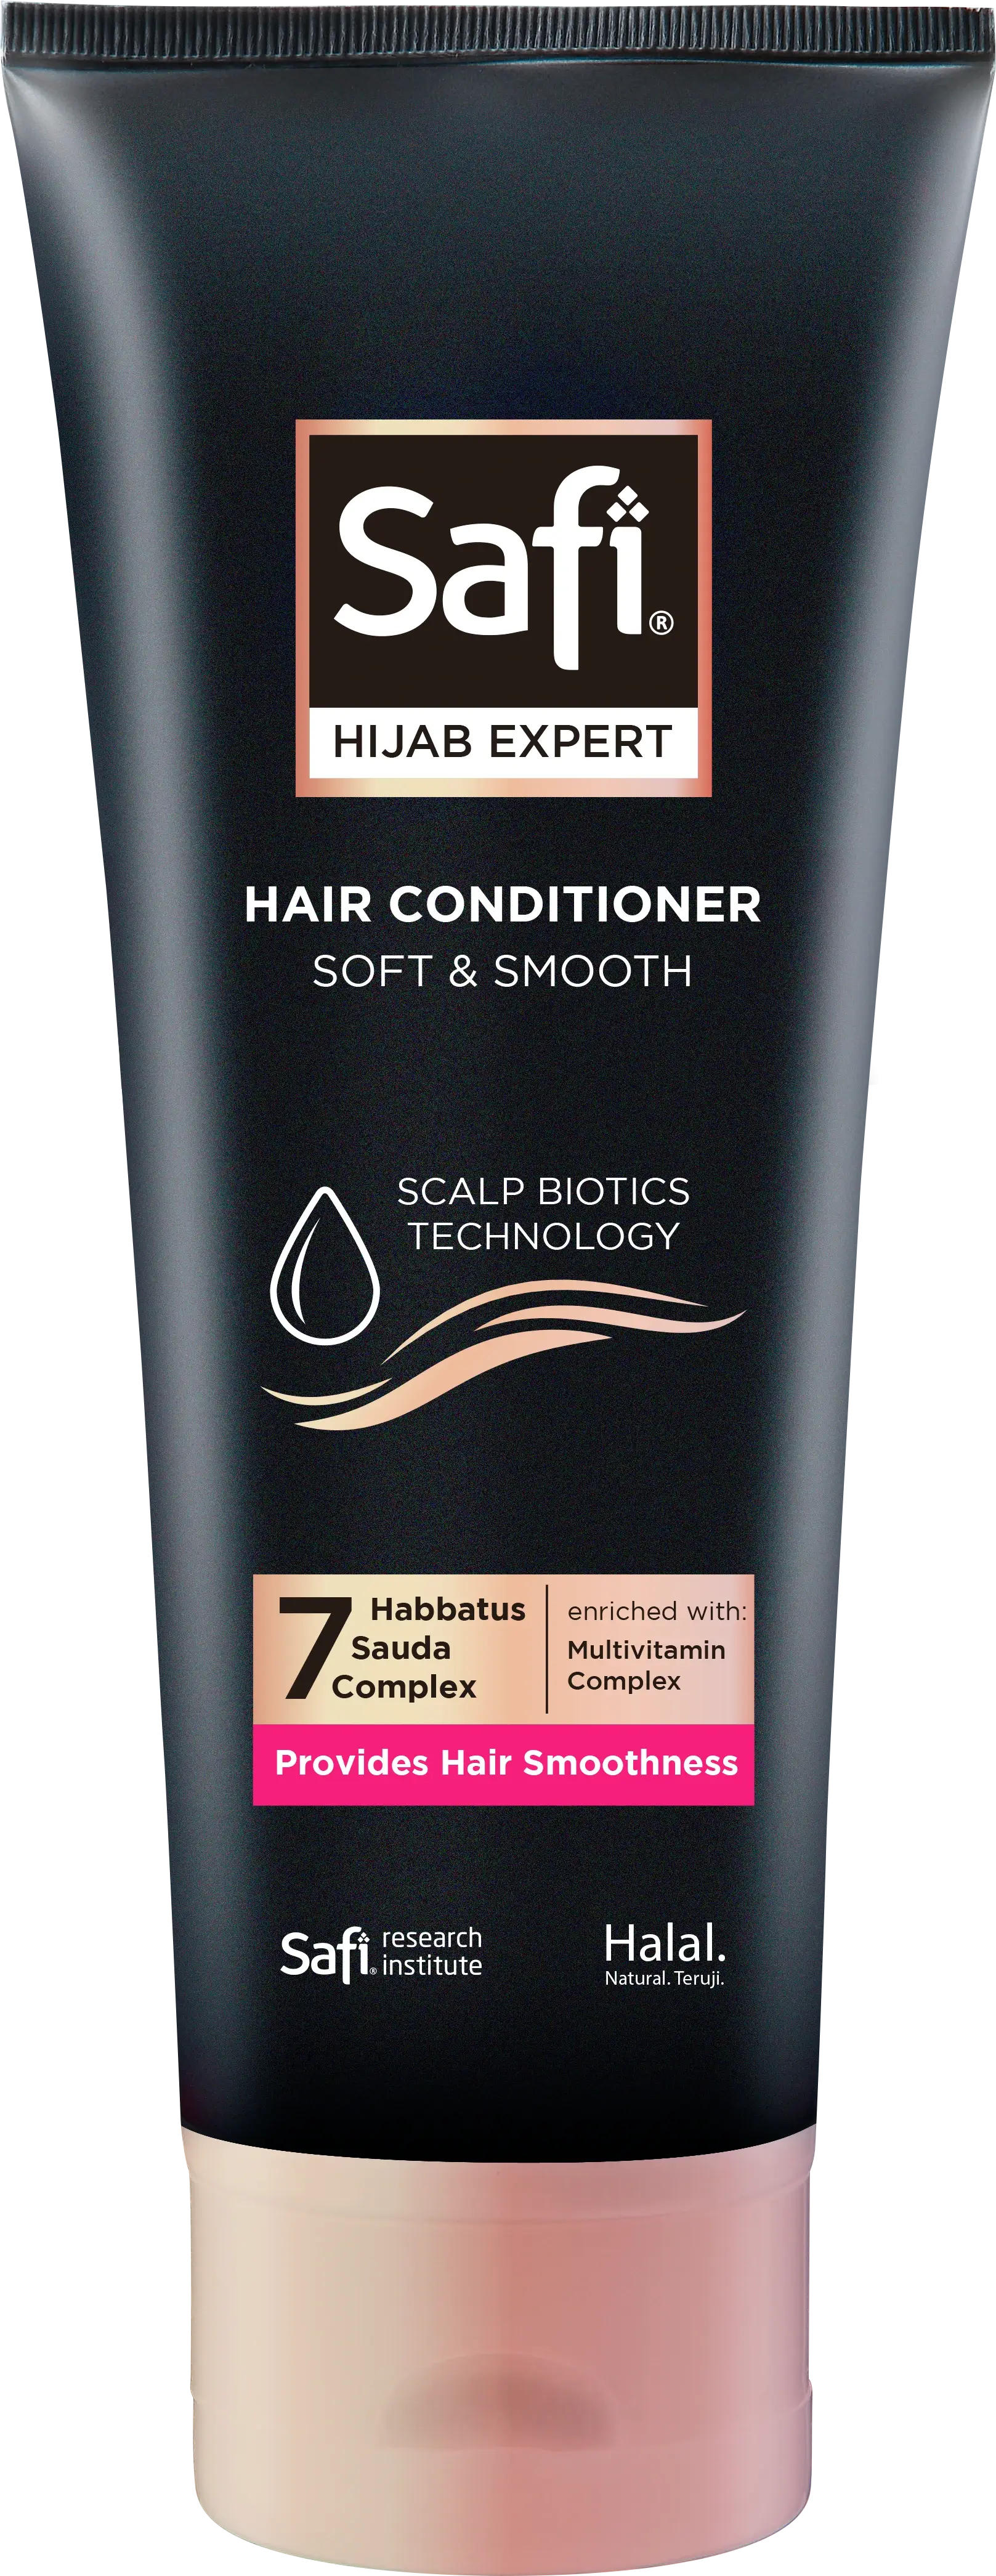 Safi Hijab Expert Soft & Smooth Hair Conditioner  - Safi Hijab Expert Soft & Smooth Hair Conditioner